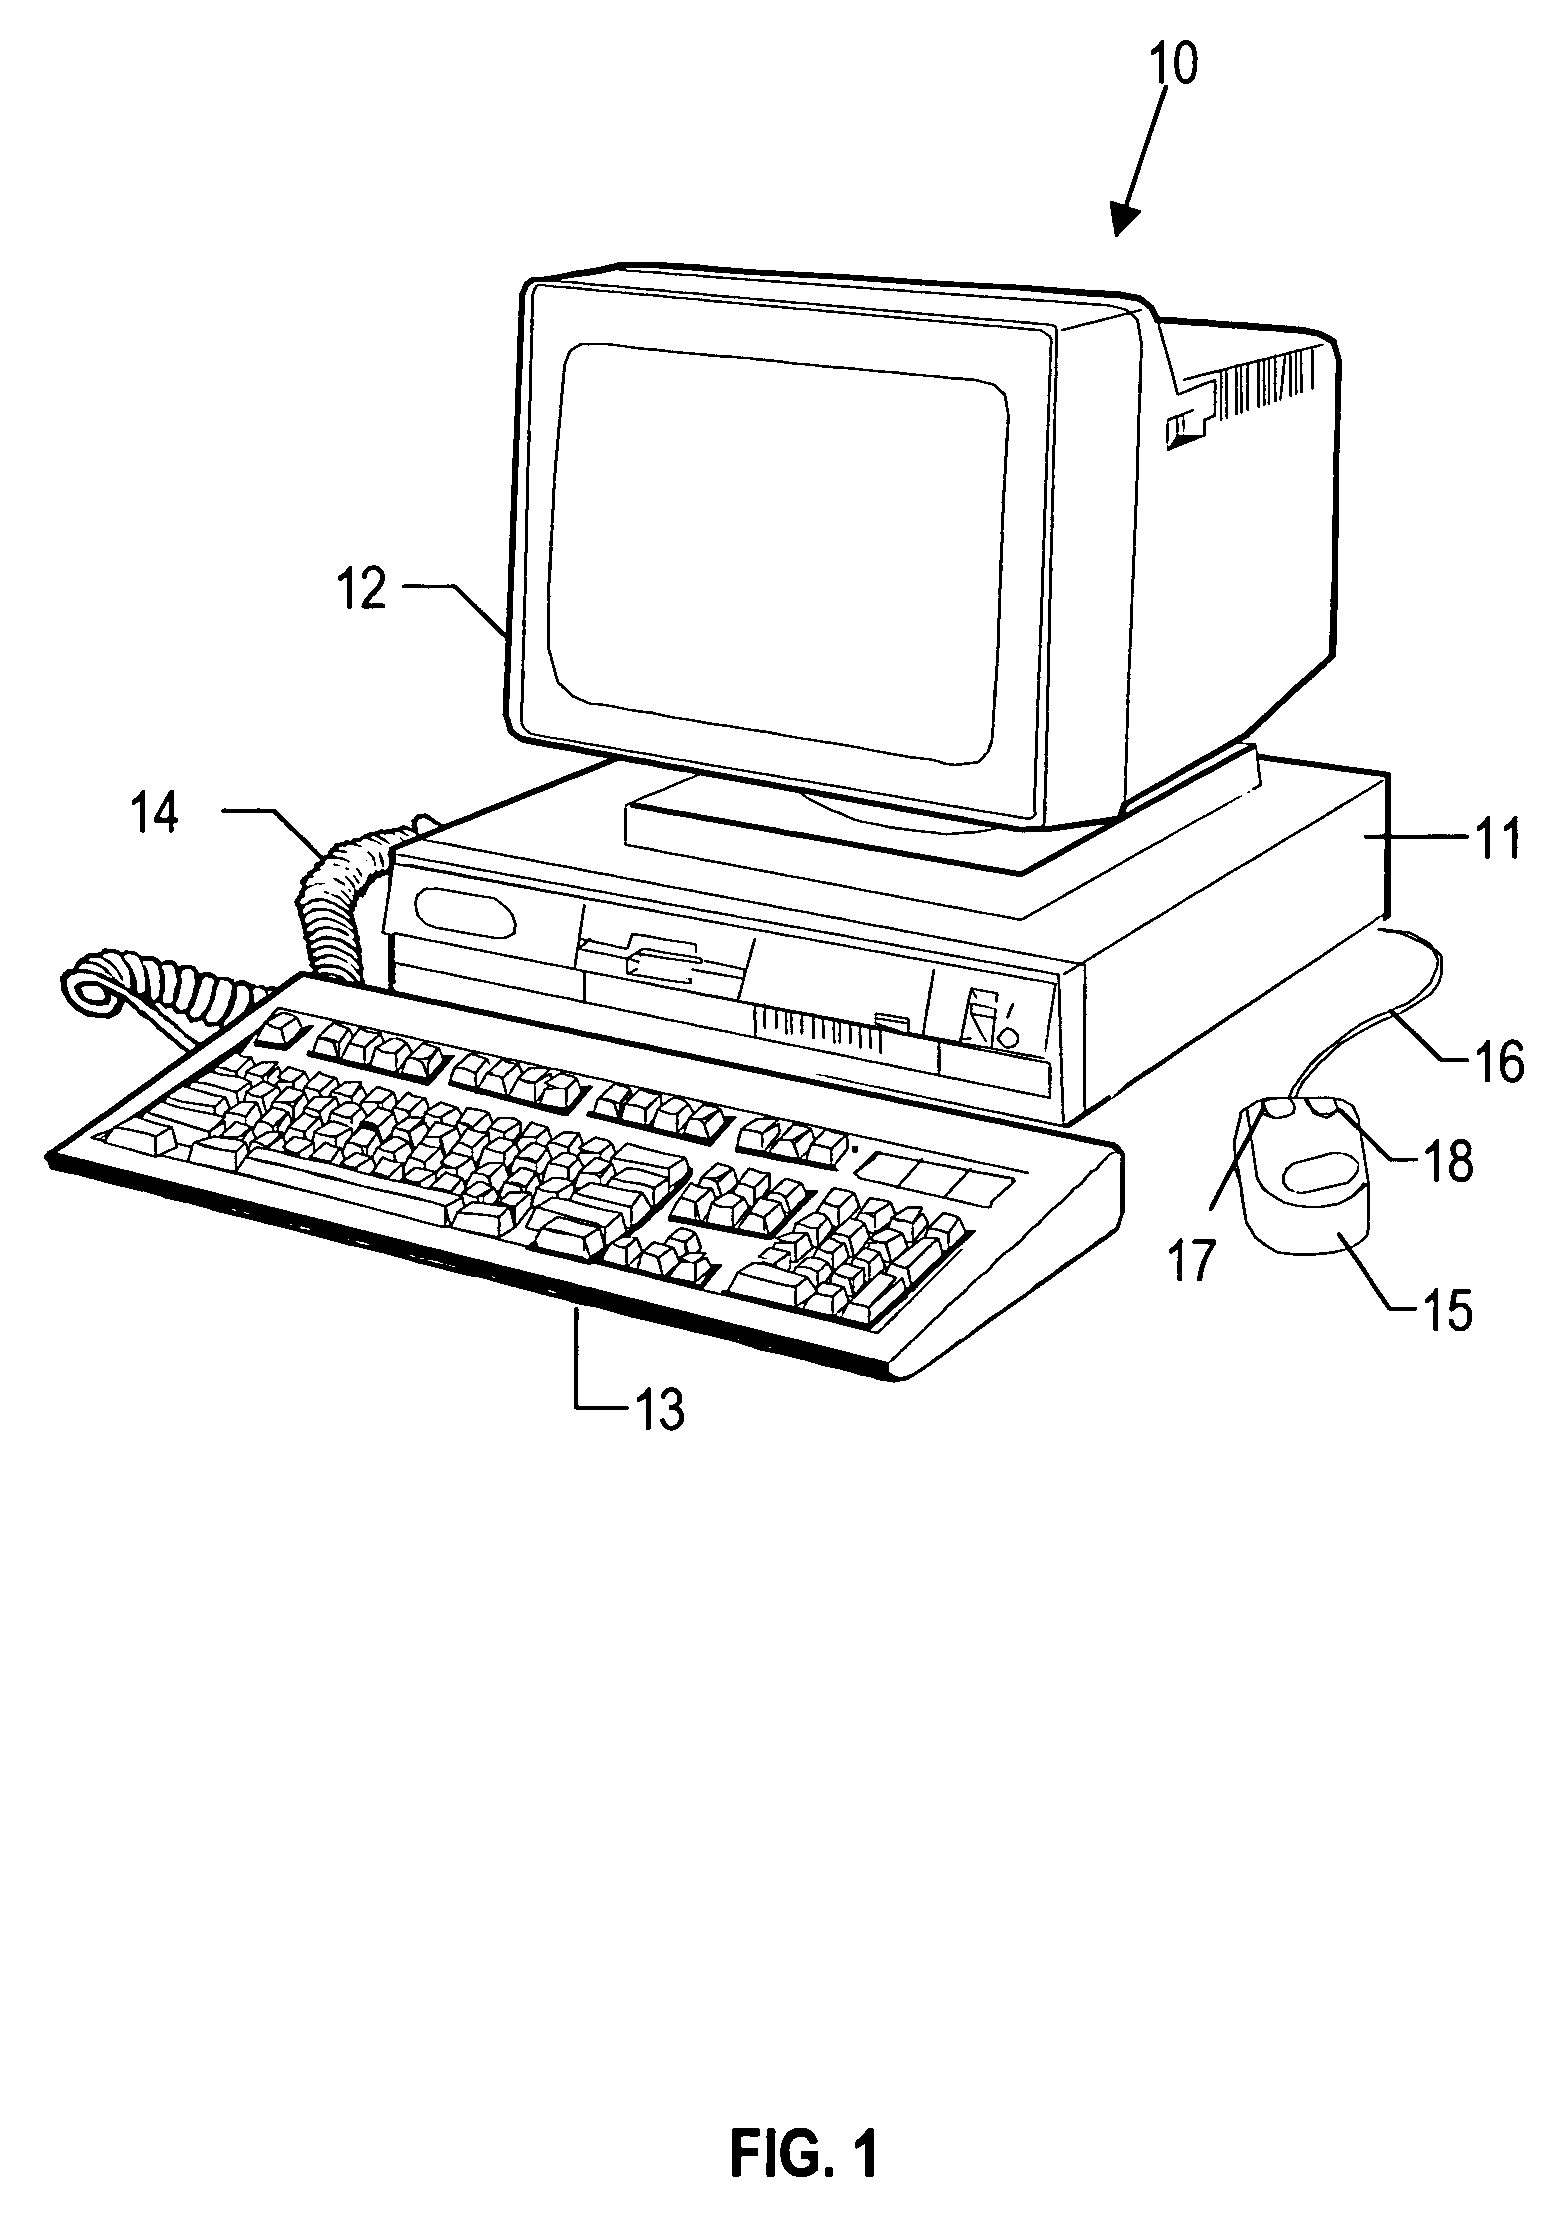 Method for managing electronic mail receipts using audio-visual notification enhancements